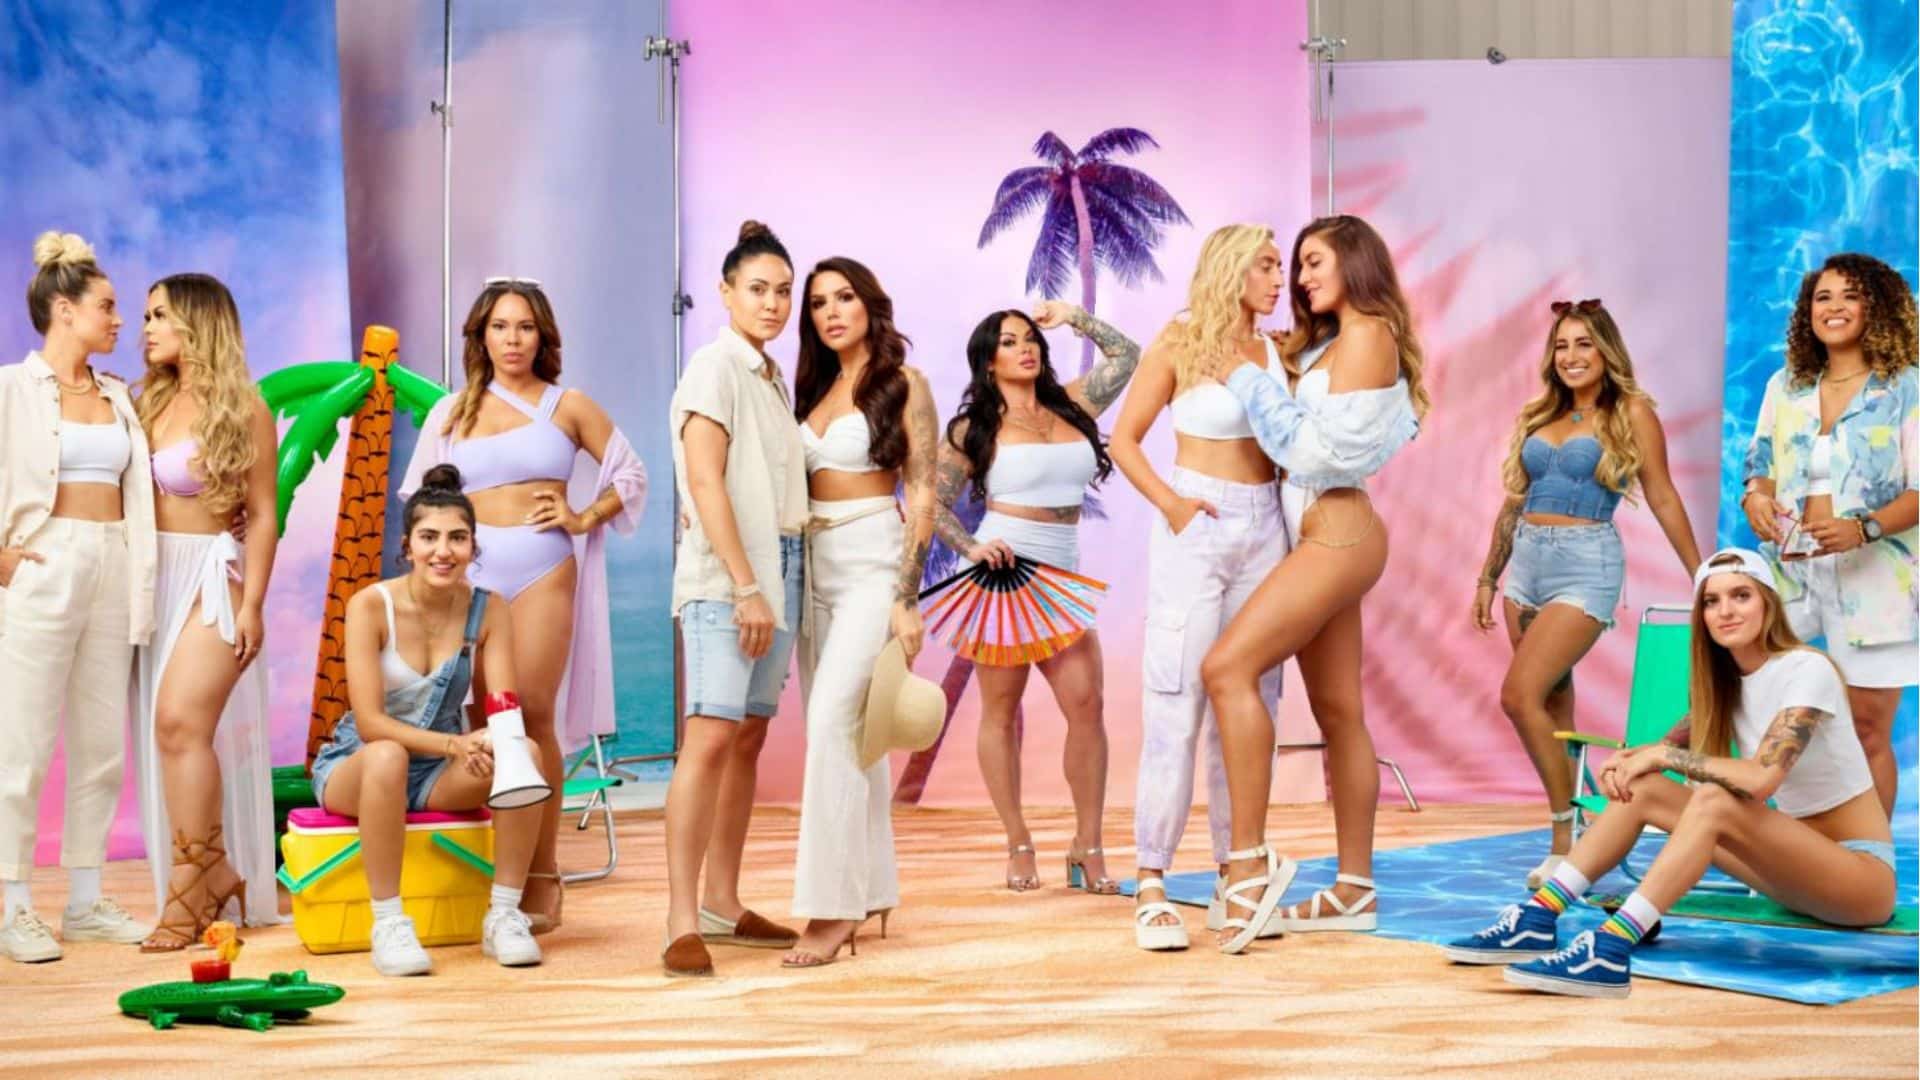 Tampa Baes Season 2: Renewed Or Canceled? Release Date And Everything We Know